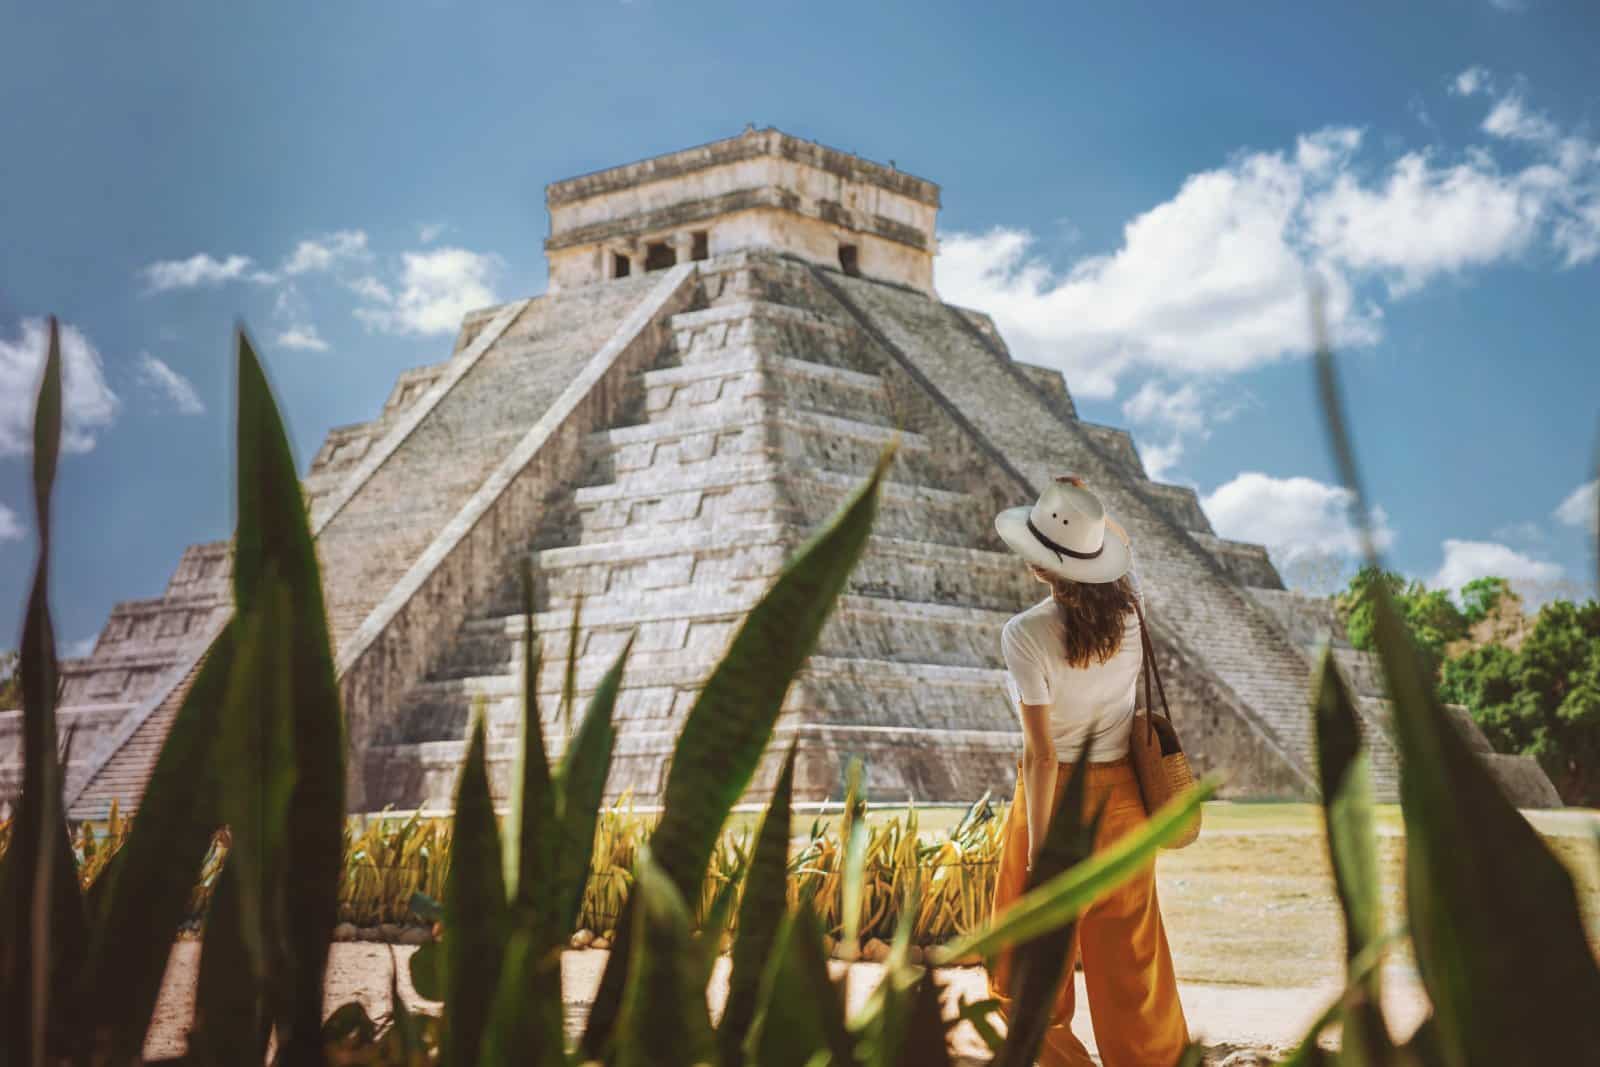 <p class="wp-caption-text">Image Credit: Shutterstock / Bucha Natallia</p>  <p>Mexico weaves ancient civilizations like the Olmecs, Maya, and Aztecs with Spanish colonial heritage and modern struggles for independence and reform. From the establishment of advanced societies with monumental architecture and astronomical achievements to the transformative Spanish conquest in the early 16th century, Mexico’s history is marked by conquest, resilience, and revolution. The fight for independence in the early 19th century, followed by internal conflicts and foreign invasions, paved the way for the pivotal Mexican Revolution, which reshaped the nation’s social and political landscape. Today, Mexico stands as a vibrant federation, its diverse culture reflecting centuries of indigenous traditions enriched by Spanish influences, manifesting in its art, cuisine, and festivals, symbolizing the blend of its complex past with its dynamic present.</p>